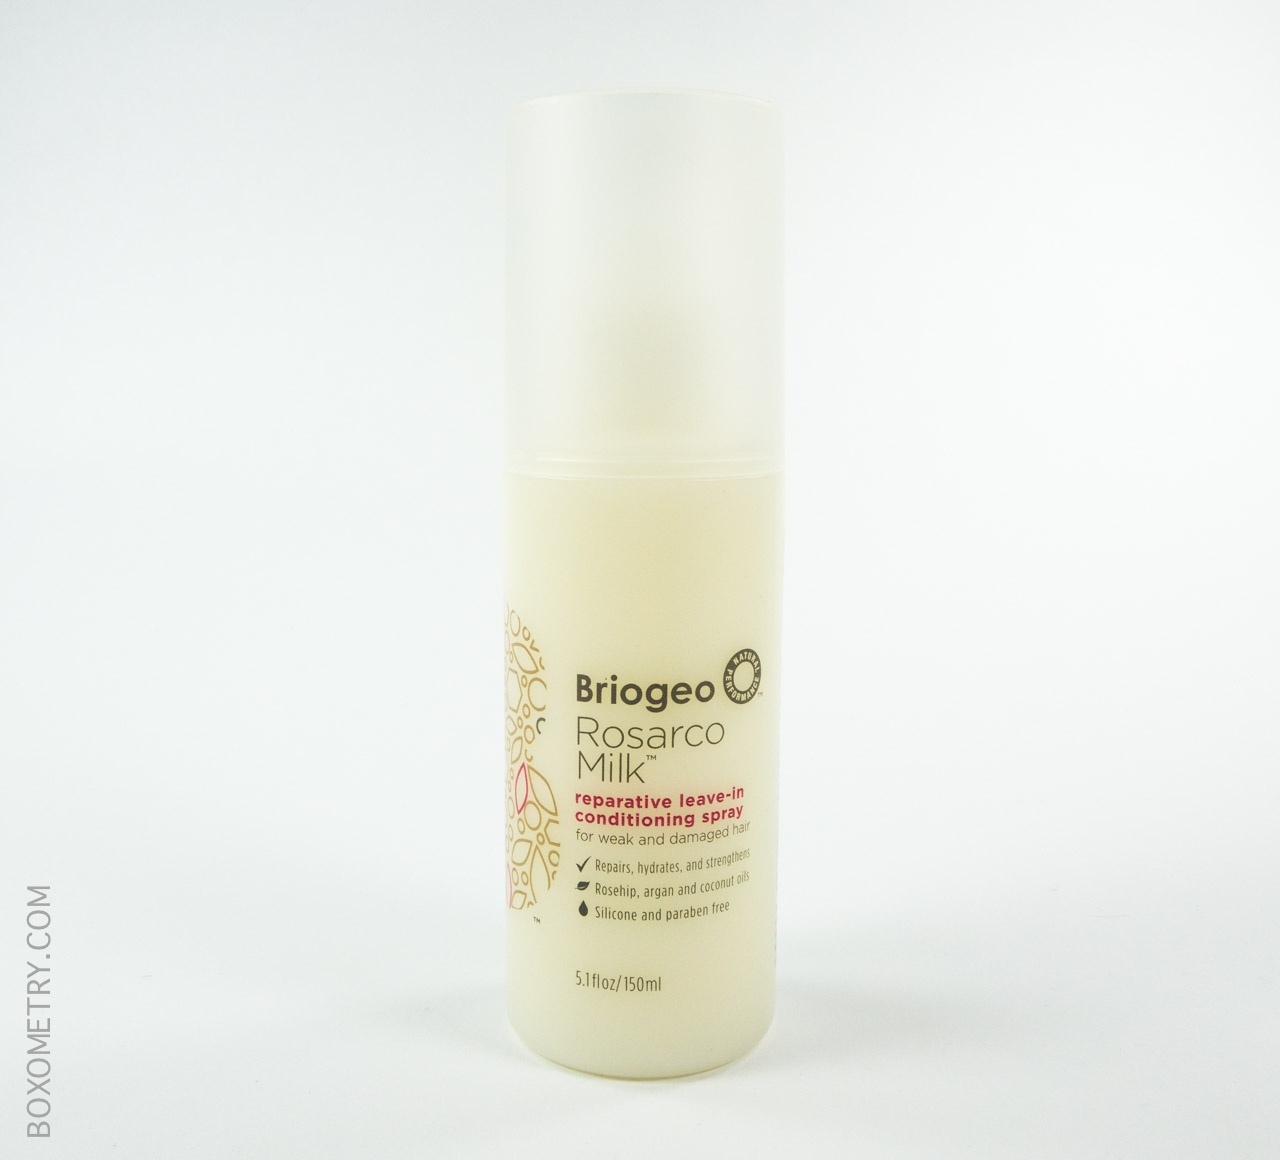 Boxometry POPSUGAR Must Have September Review - Briogeo Rosarco Milk Reparative Leave-In Conditioning Spray